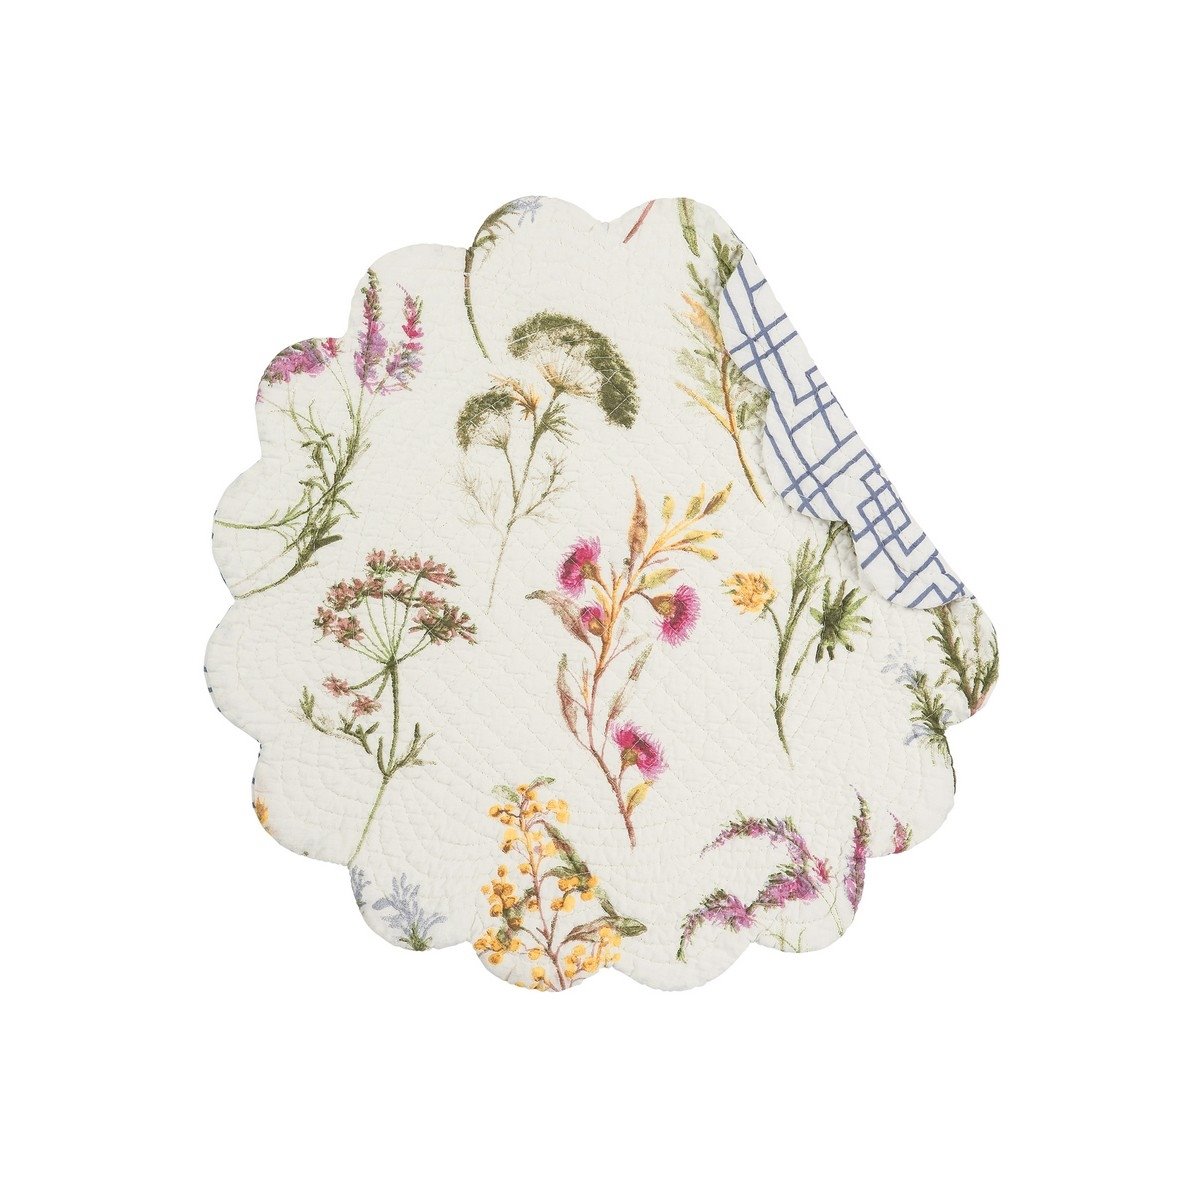 Genevieve Round Quilted Placemat